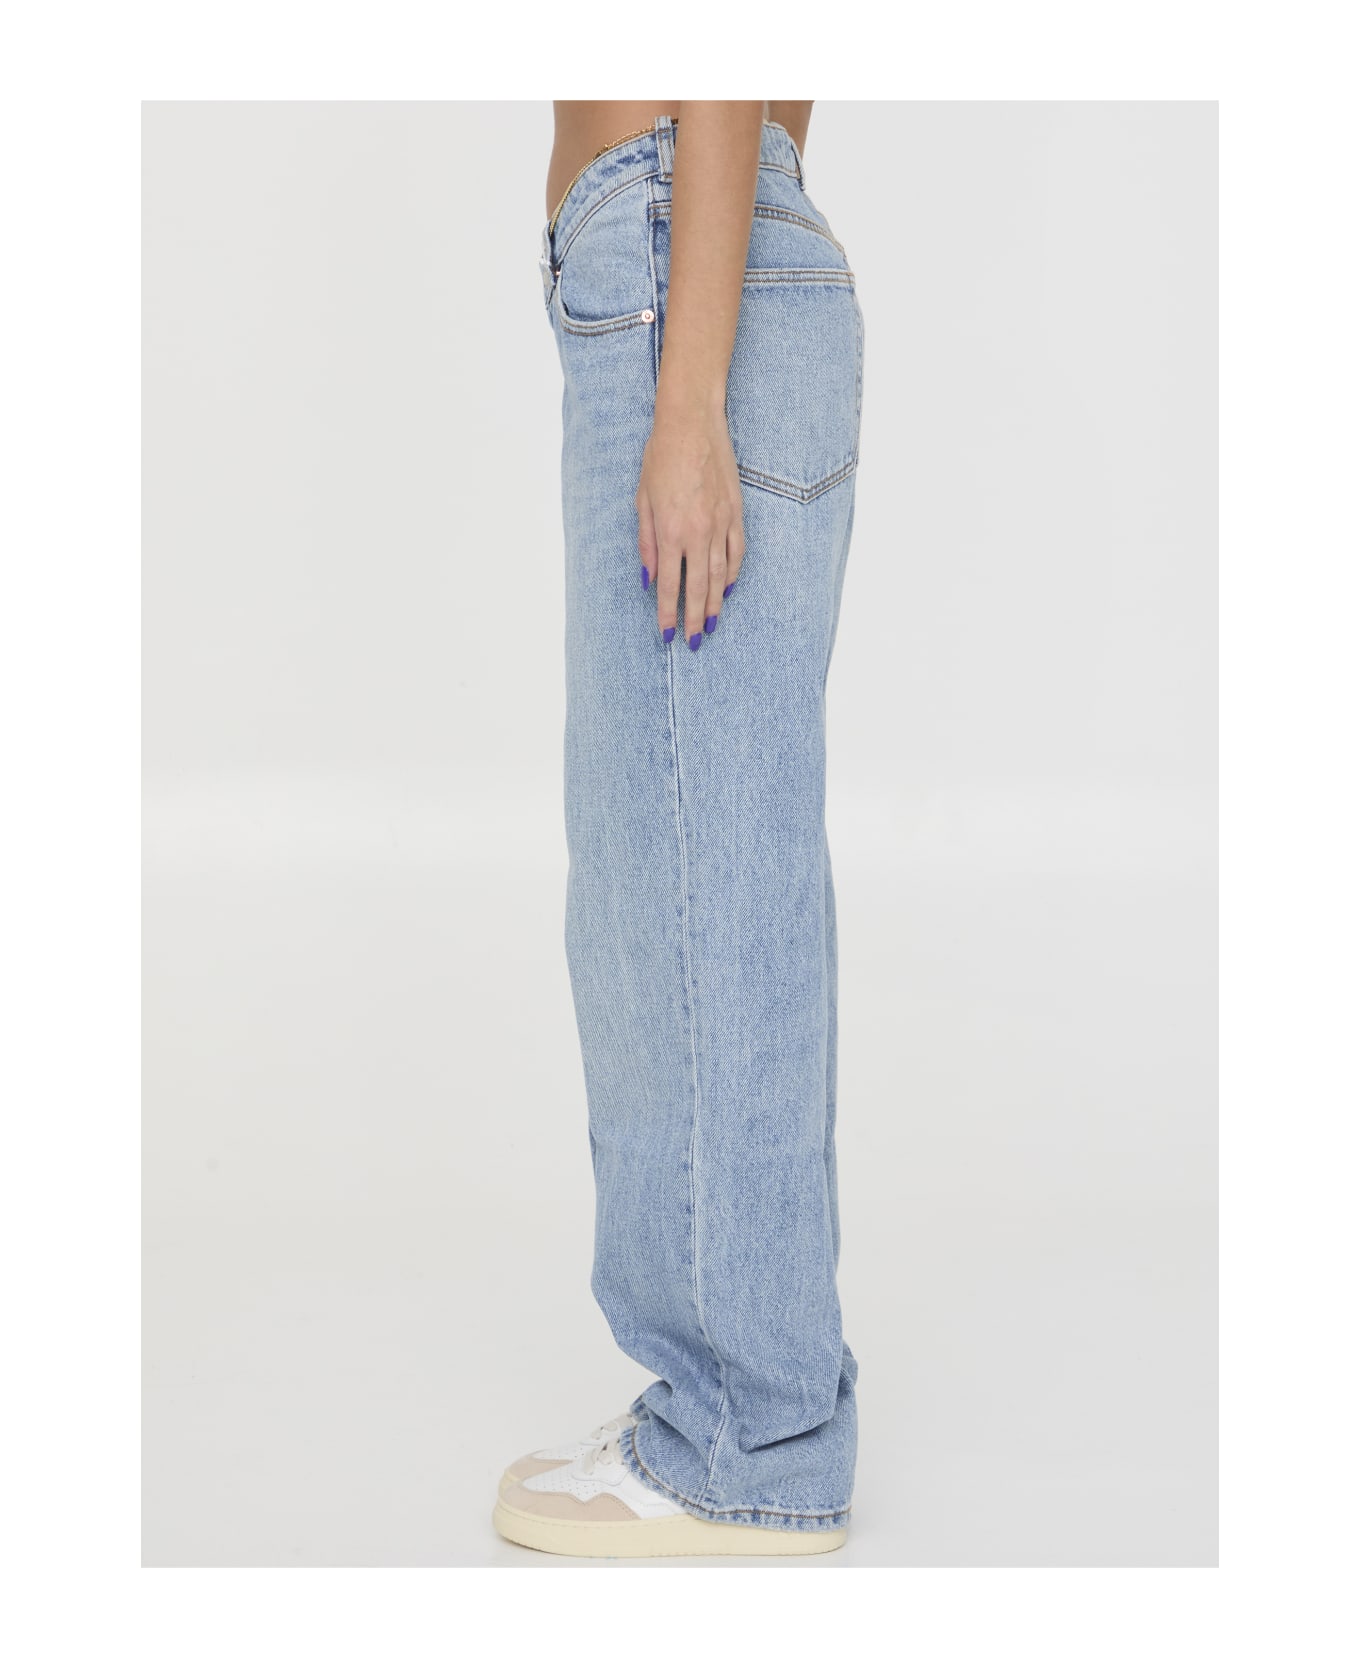 Alexander Wang Denim Jeans With Nameplate - A Vintage Faded Indigo